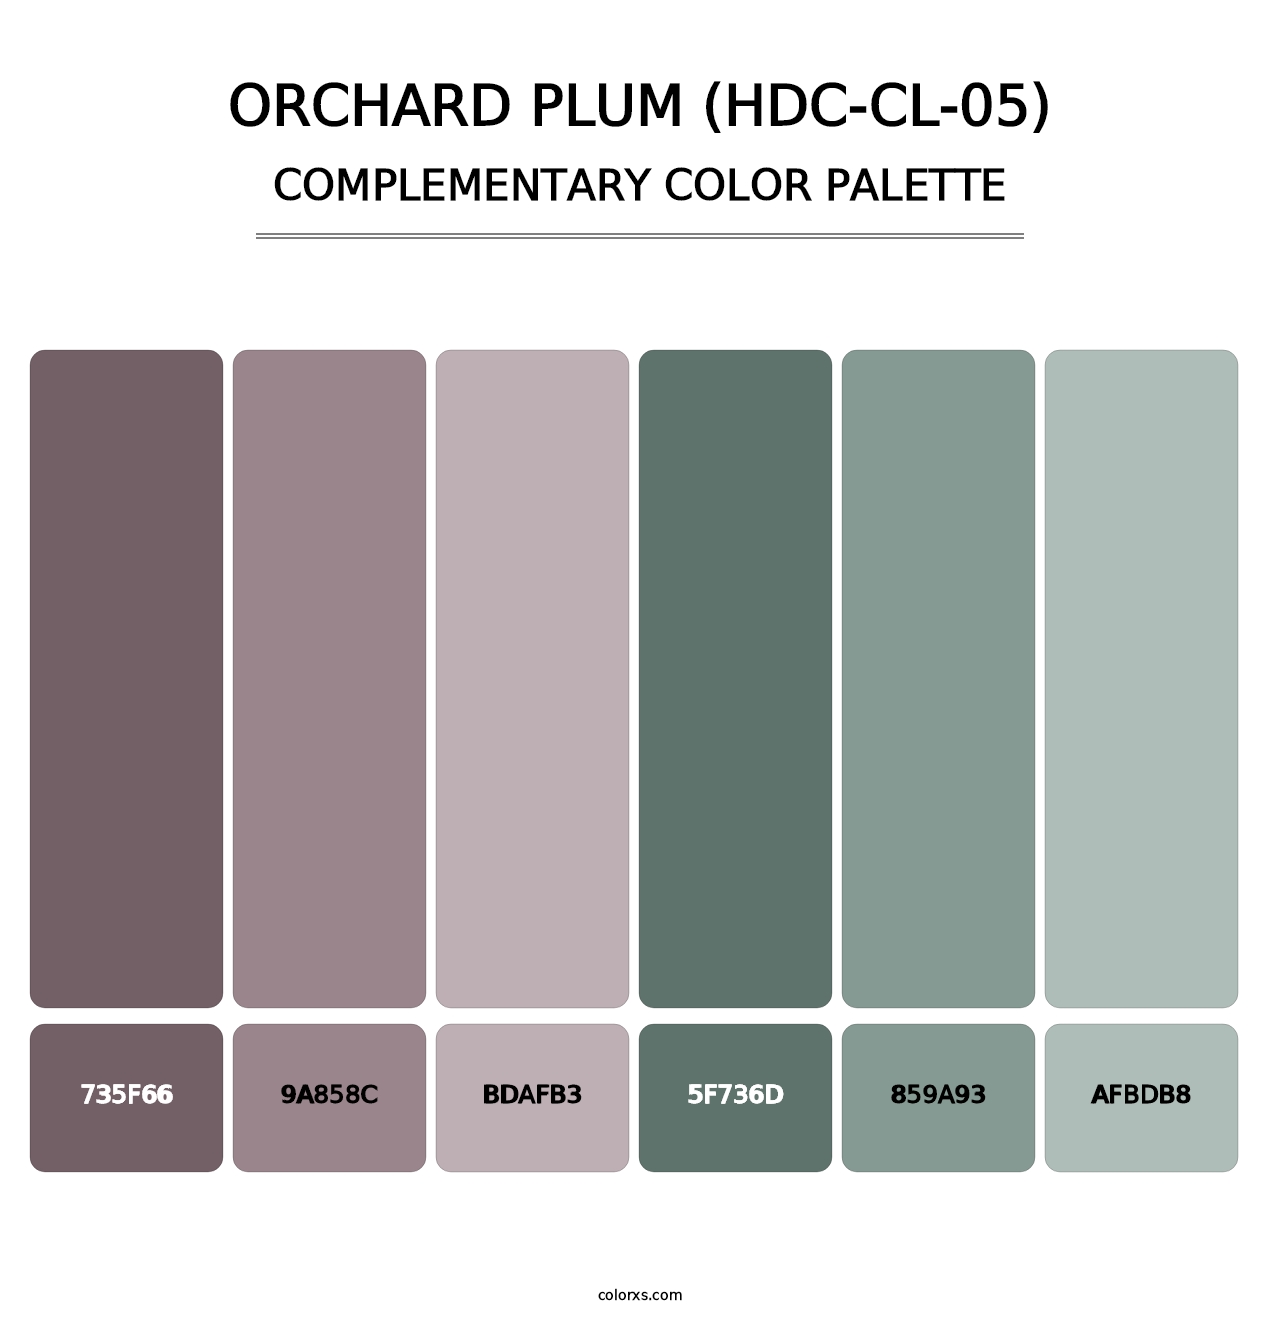 Orchard Plum (HDC-CL-05) - Complementary Color Palette